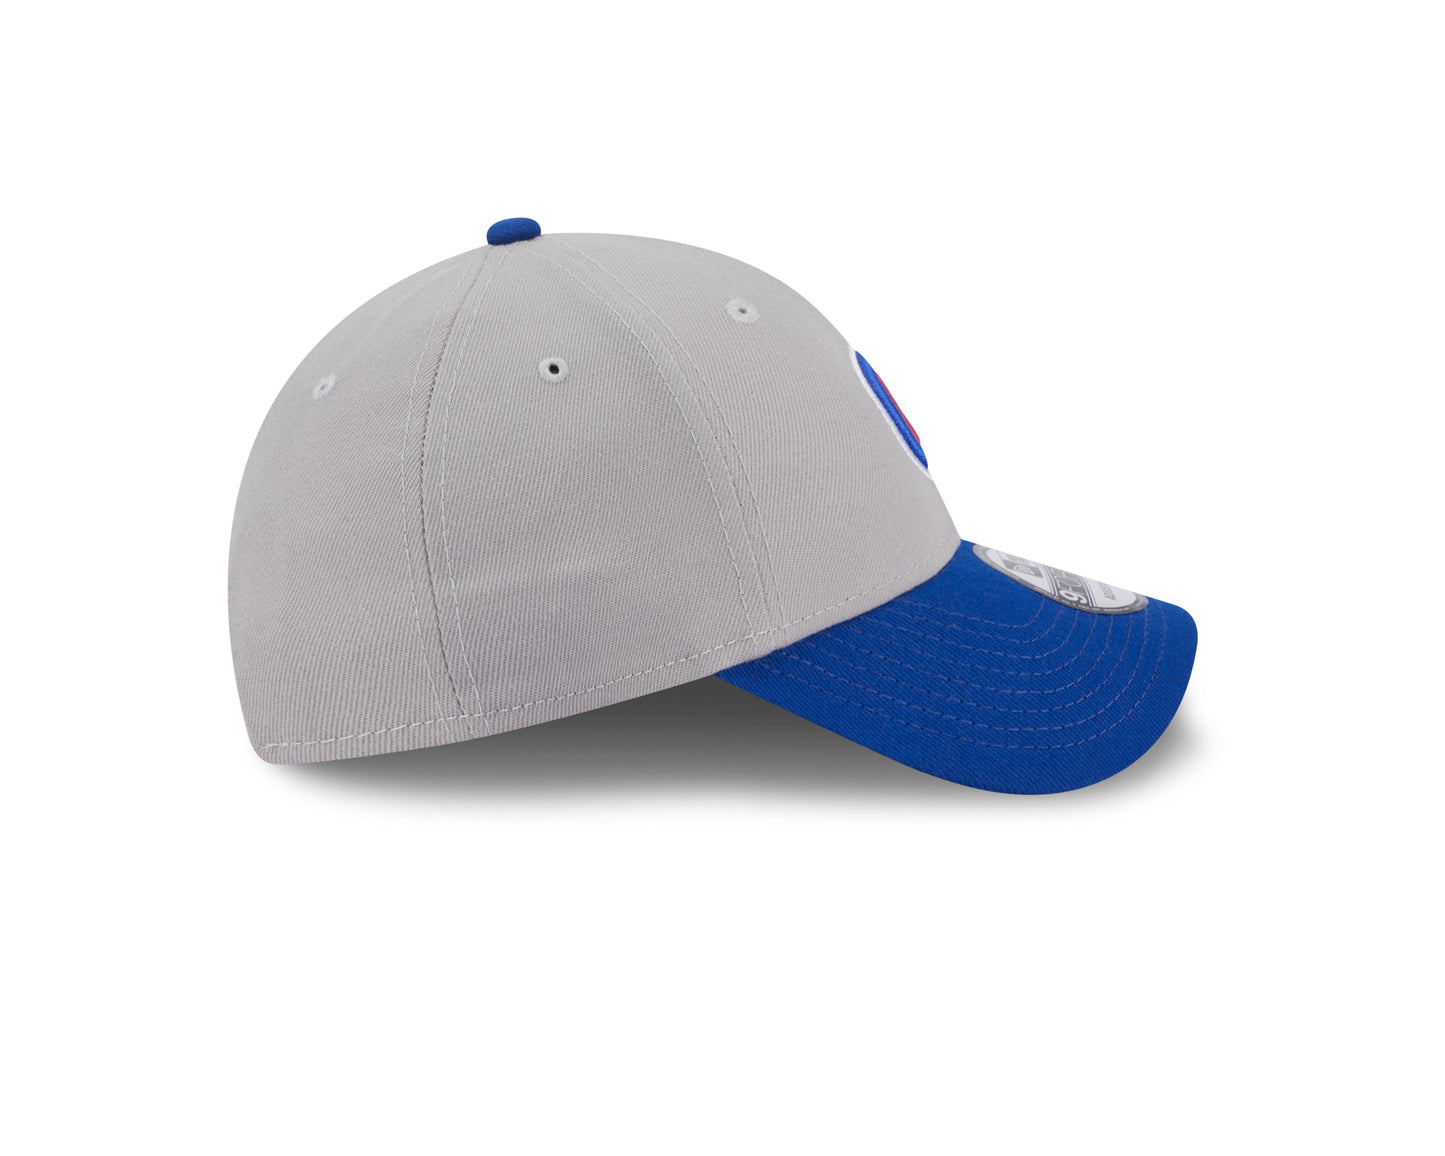 Chicago Cubs New Era The League 2 Tone Gray/Royal 9FORTY Adjustable Hat